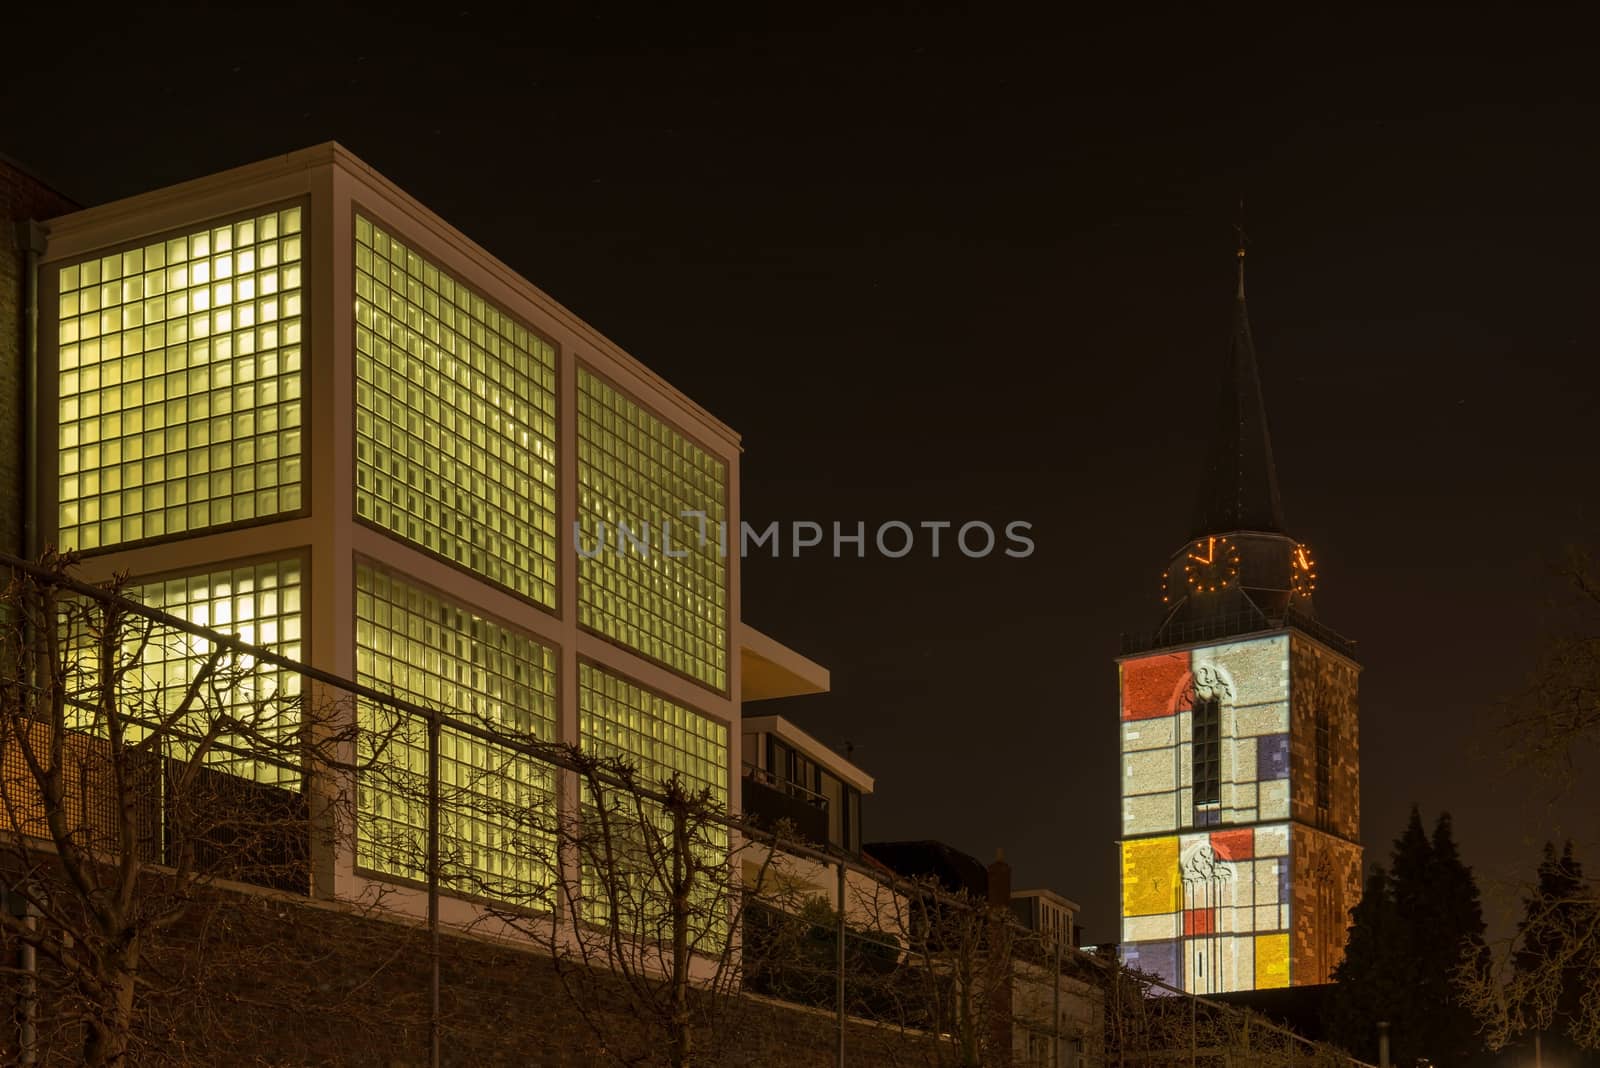 Jacobs church in Winterswijk in the Netherlands in special famous artist "Piet Mondriaan" lighting in the early spring of 2014 because of his 142th birthday
The world famous painter Piet Mondriaan was a resident of Winterswijk in his early years as an artist.
Winterswijk, Gelderland, Netherlands